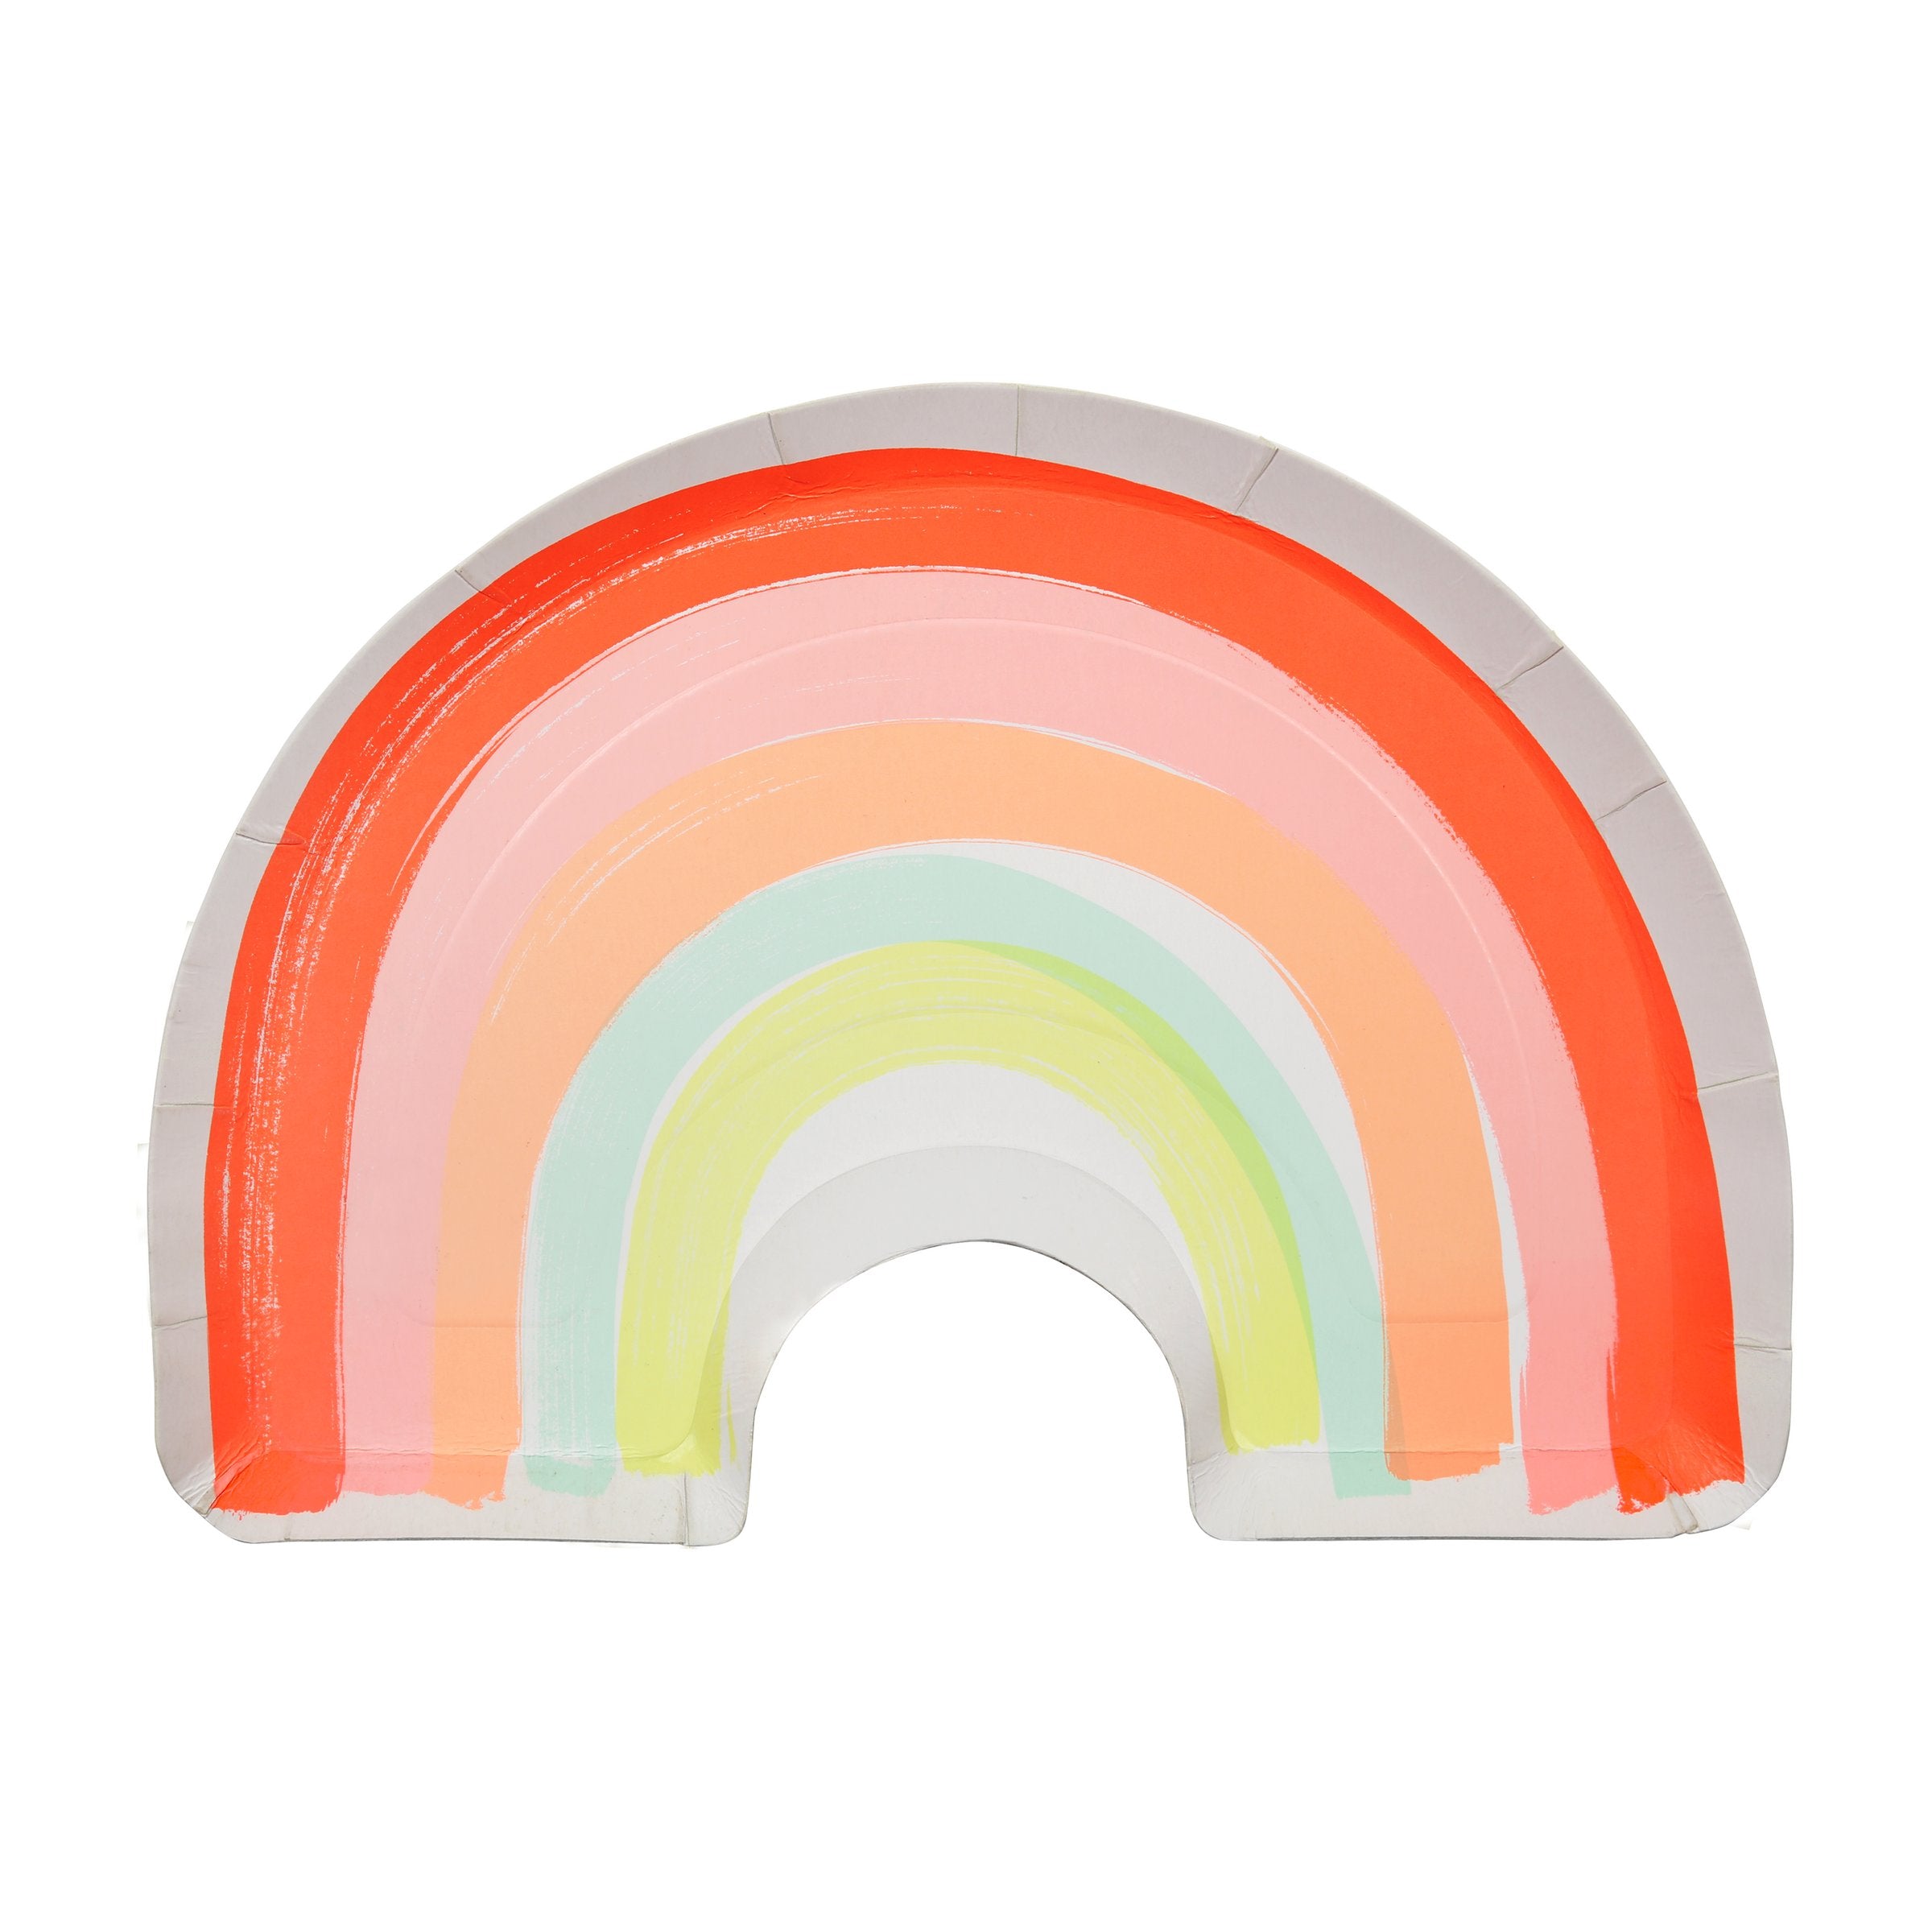 These paper plates are crafted in the shape of a rainbow with lots of bright neon colours.